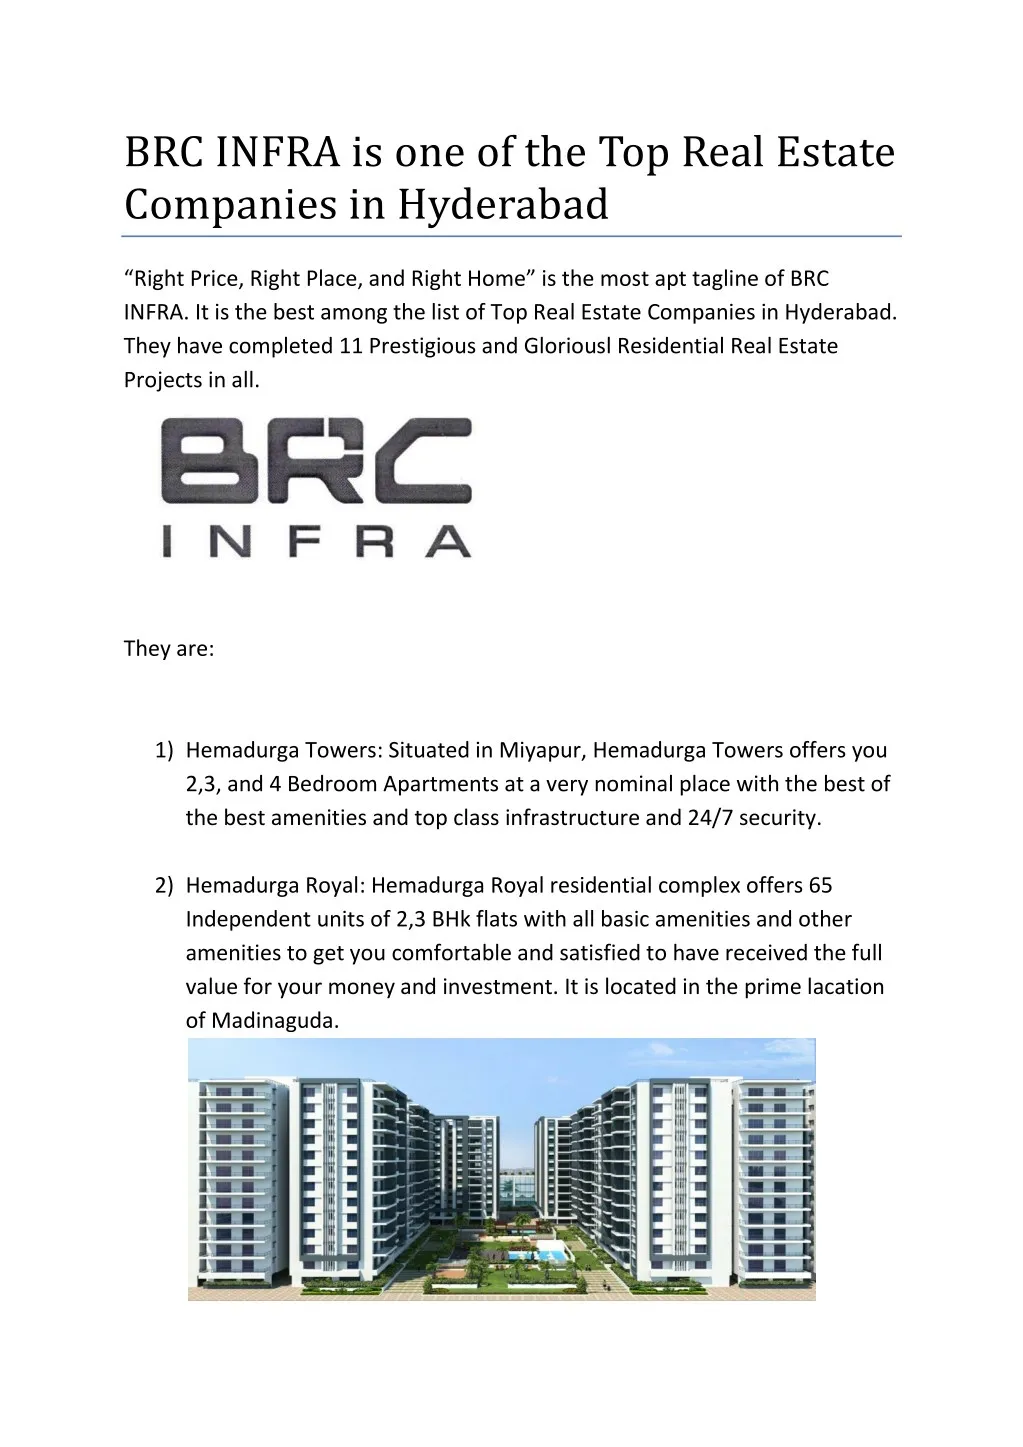 brc infra is one of the top real estate companies